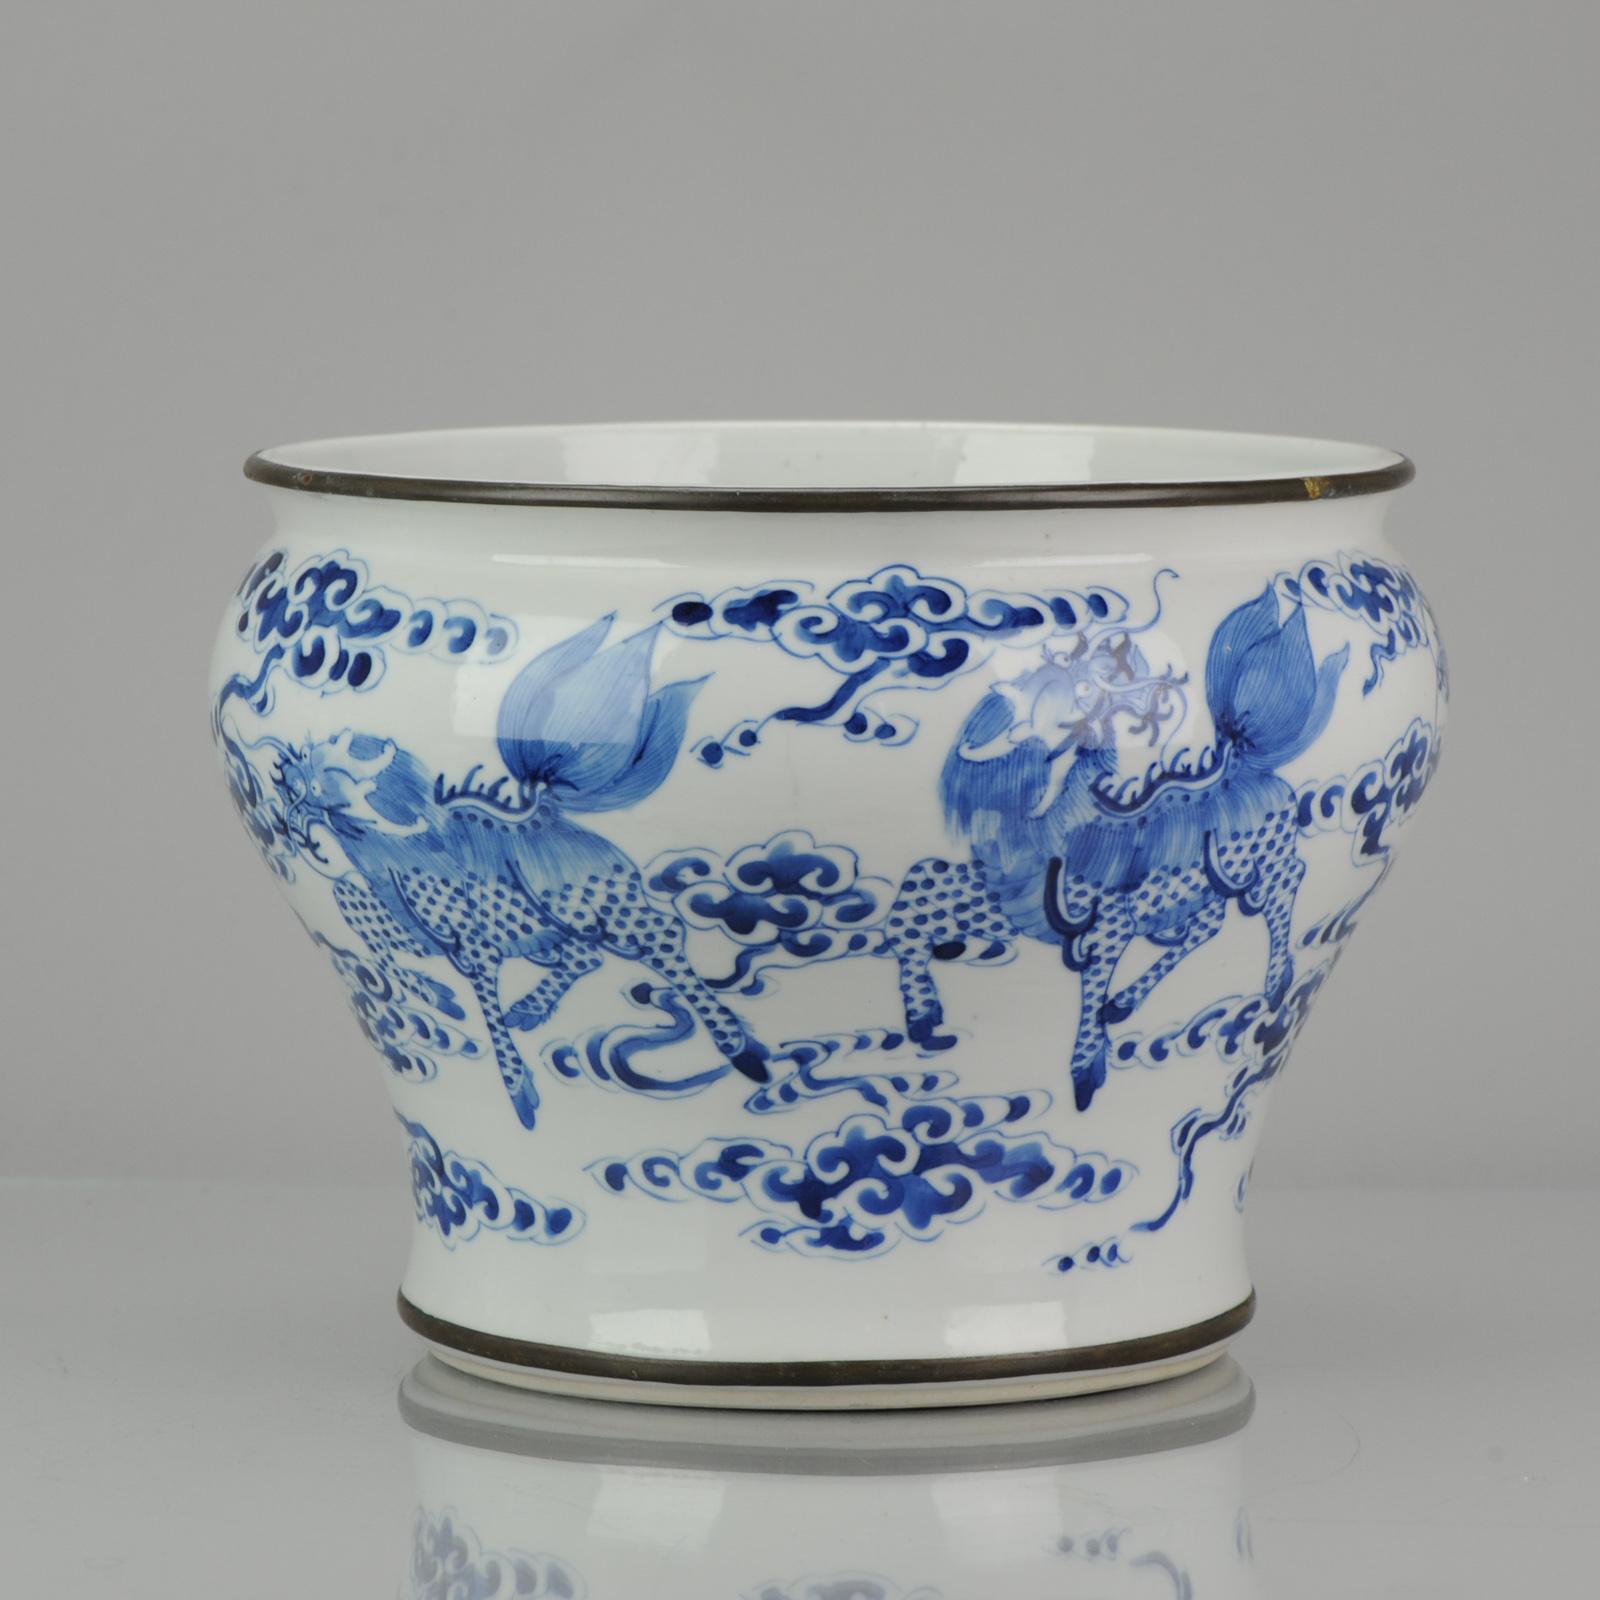 Sharing with you this nicely shaped table spittoon. Bleu de Hue porcelain for the Vietnamese market. This piece dates to the 19th century.
Nicely formed and heavily potted. Attentively hand painted with underglaze blue Qilins amongst clouds/ruyi